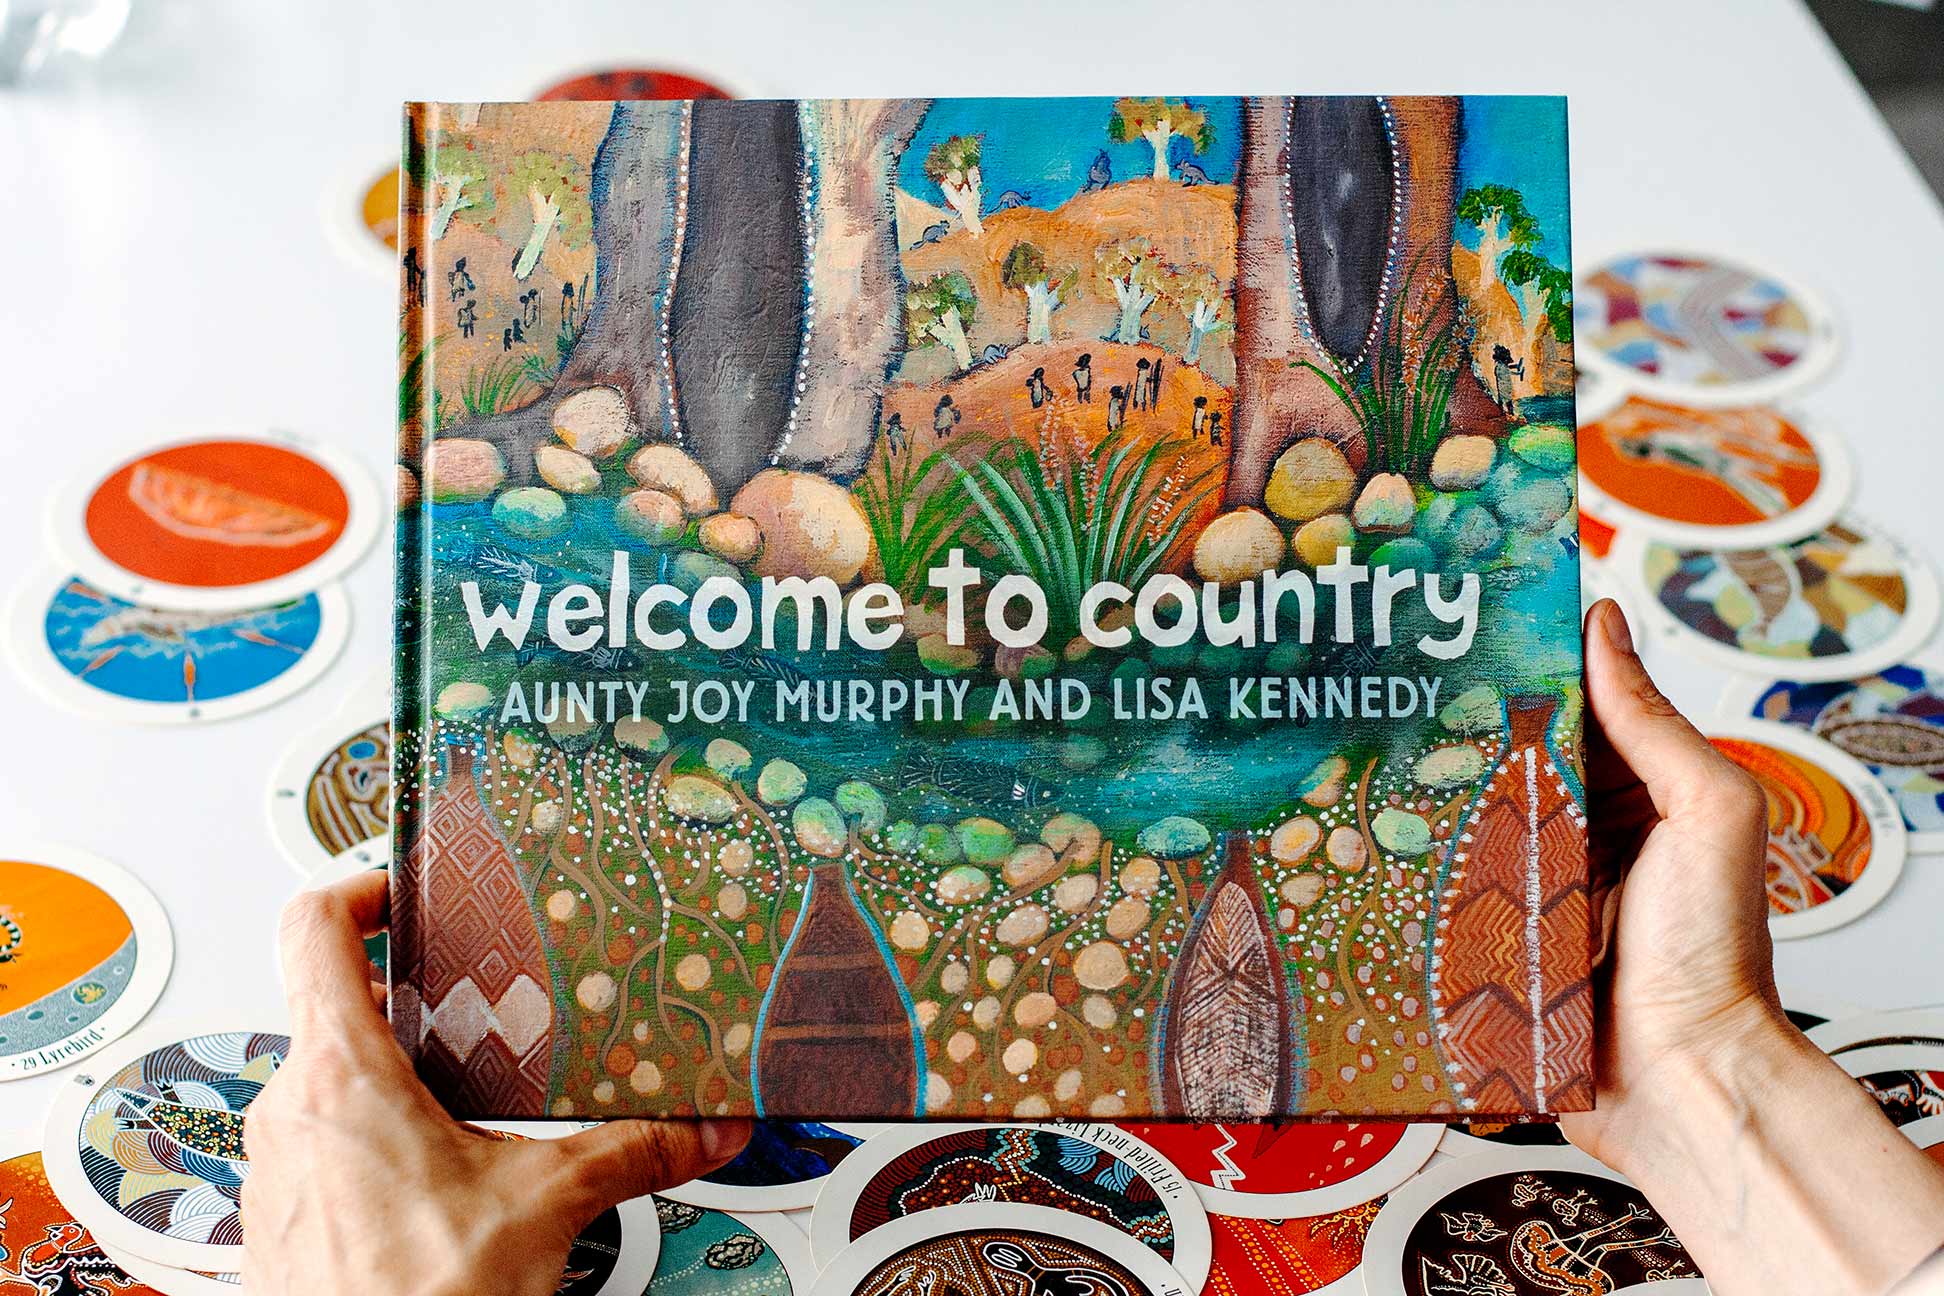 Book about welcome to coutry